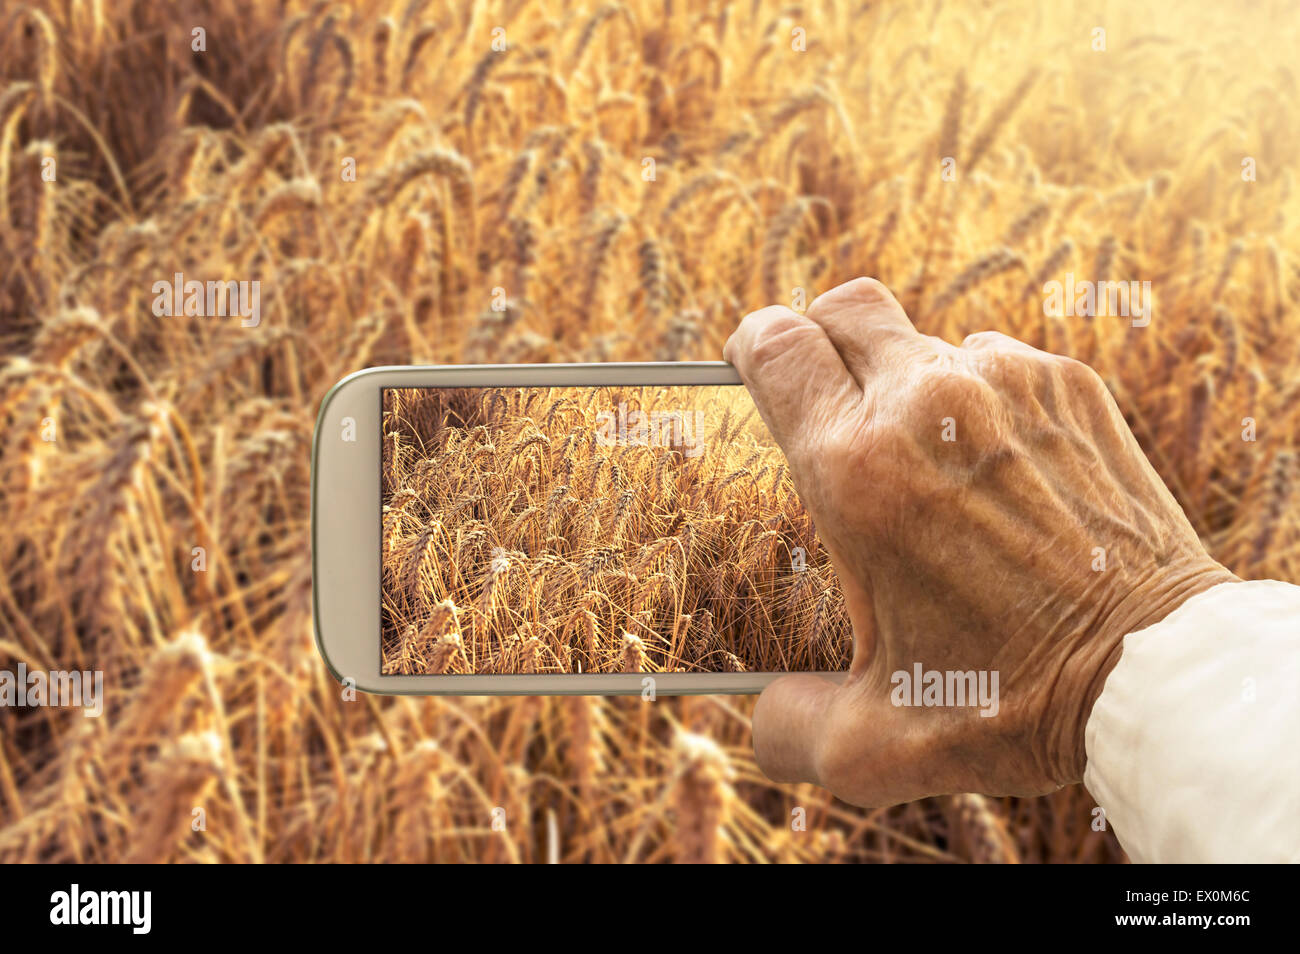 Old hand taking photography of wheat field on smart phone. Agricultural concept. Stock Photo